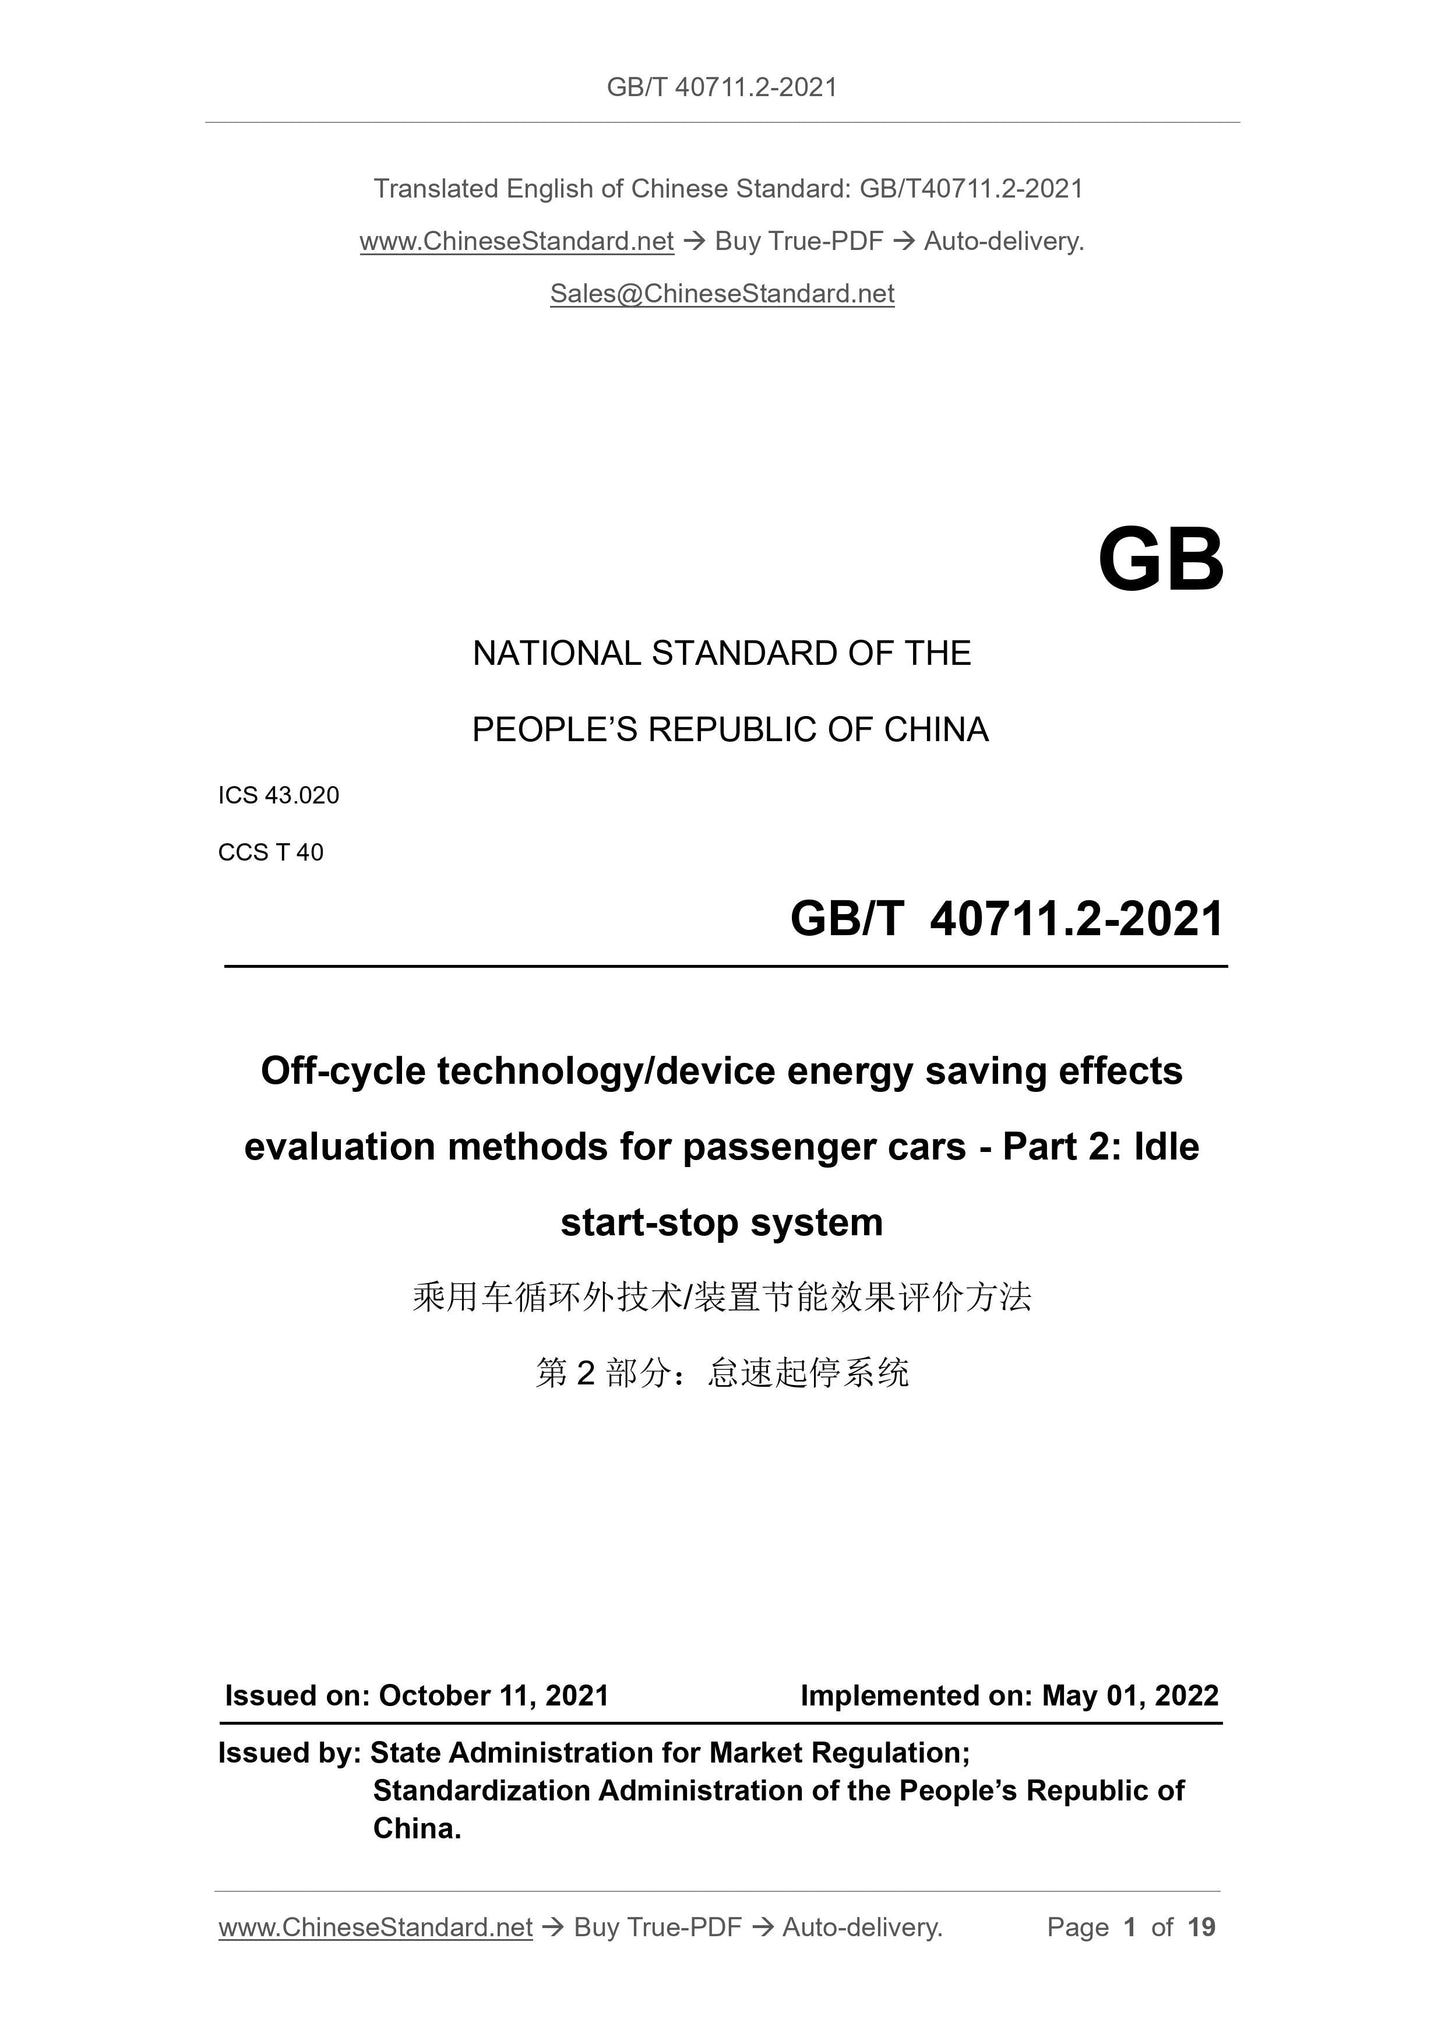 GB/T 40711.2-2021 Page 1